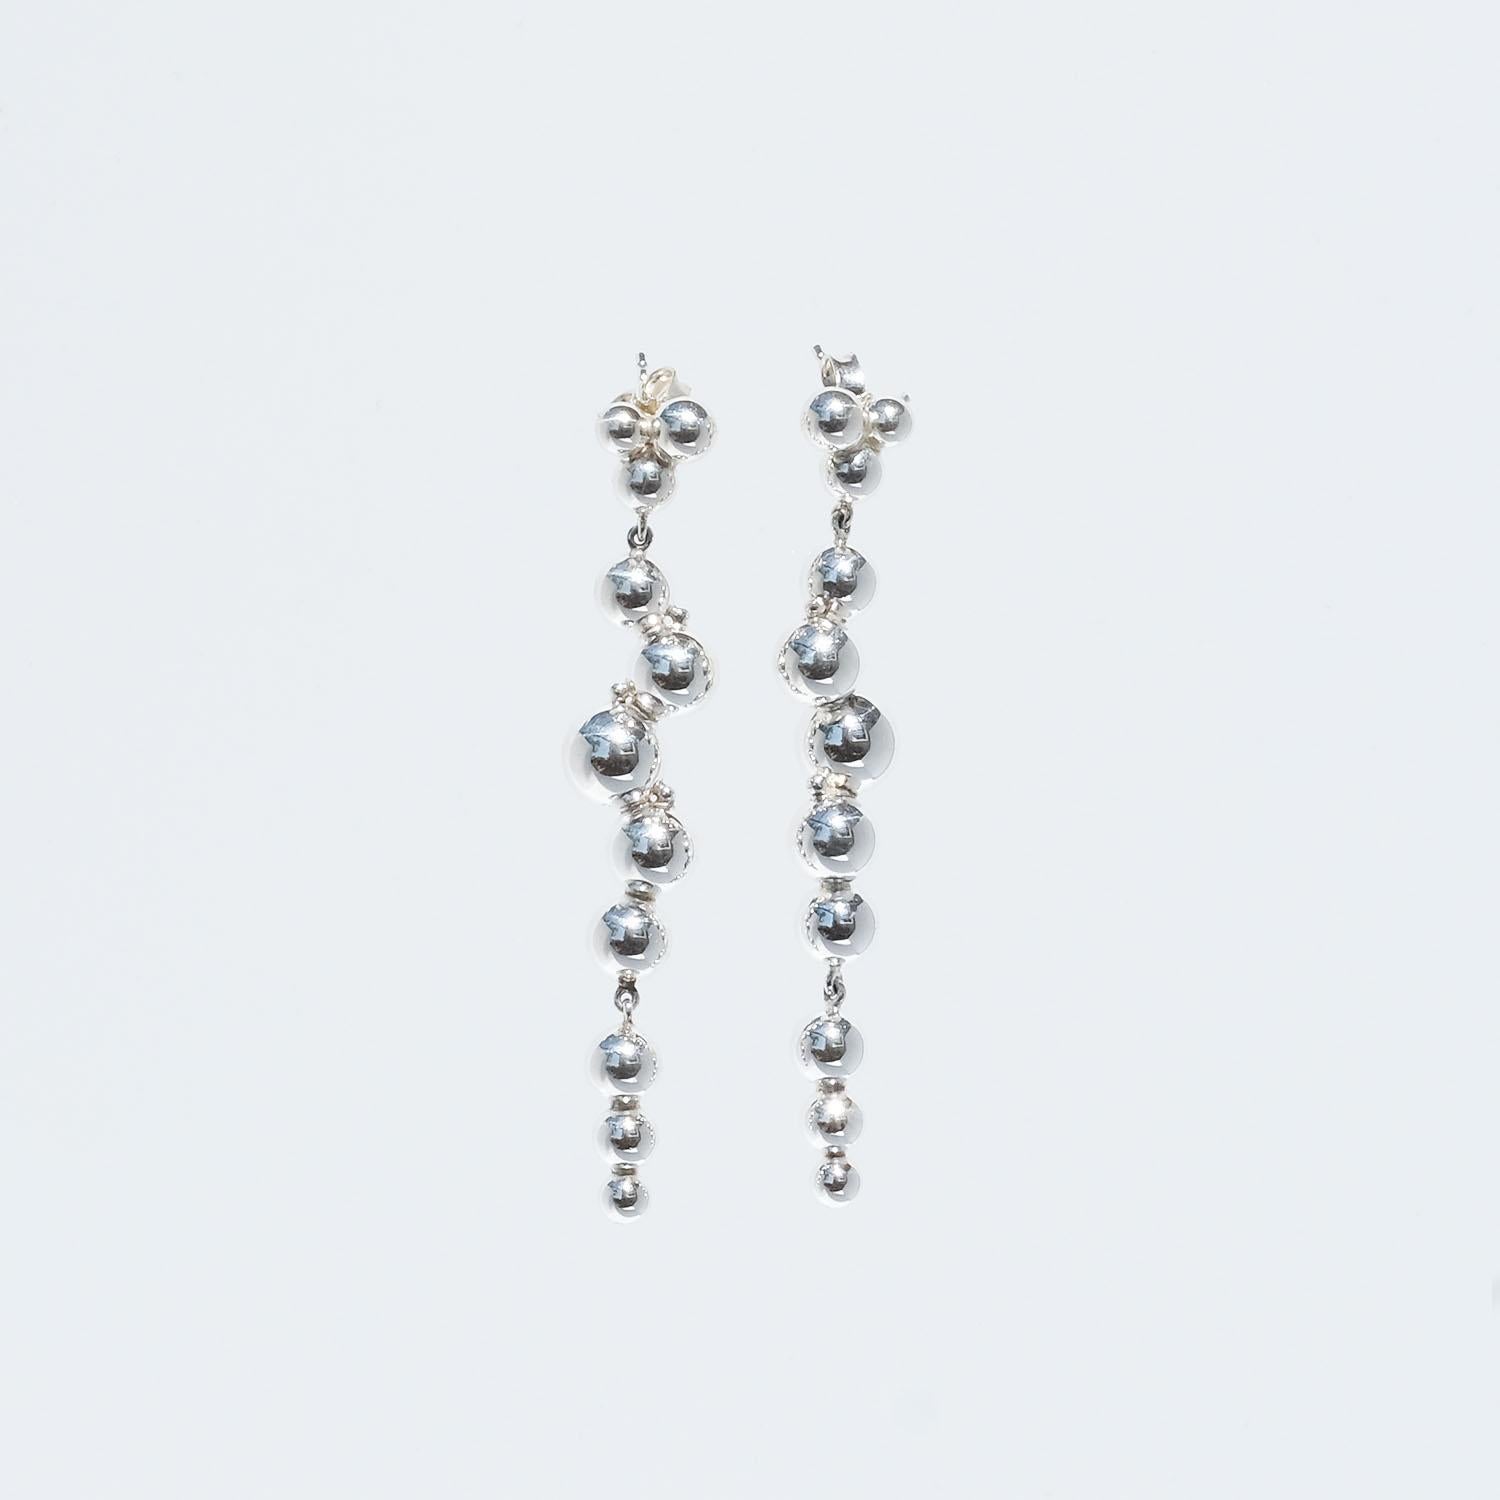 These sterling silver earrings are made of small silver globes that are welded together. They look like oblong bunches of silver grapes. To keep the earrings in place a pole with a clutch backing is used. 

The earrings have both a graceful and